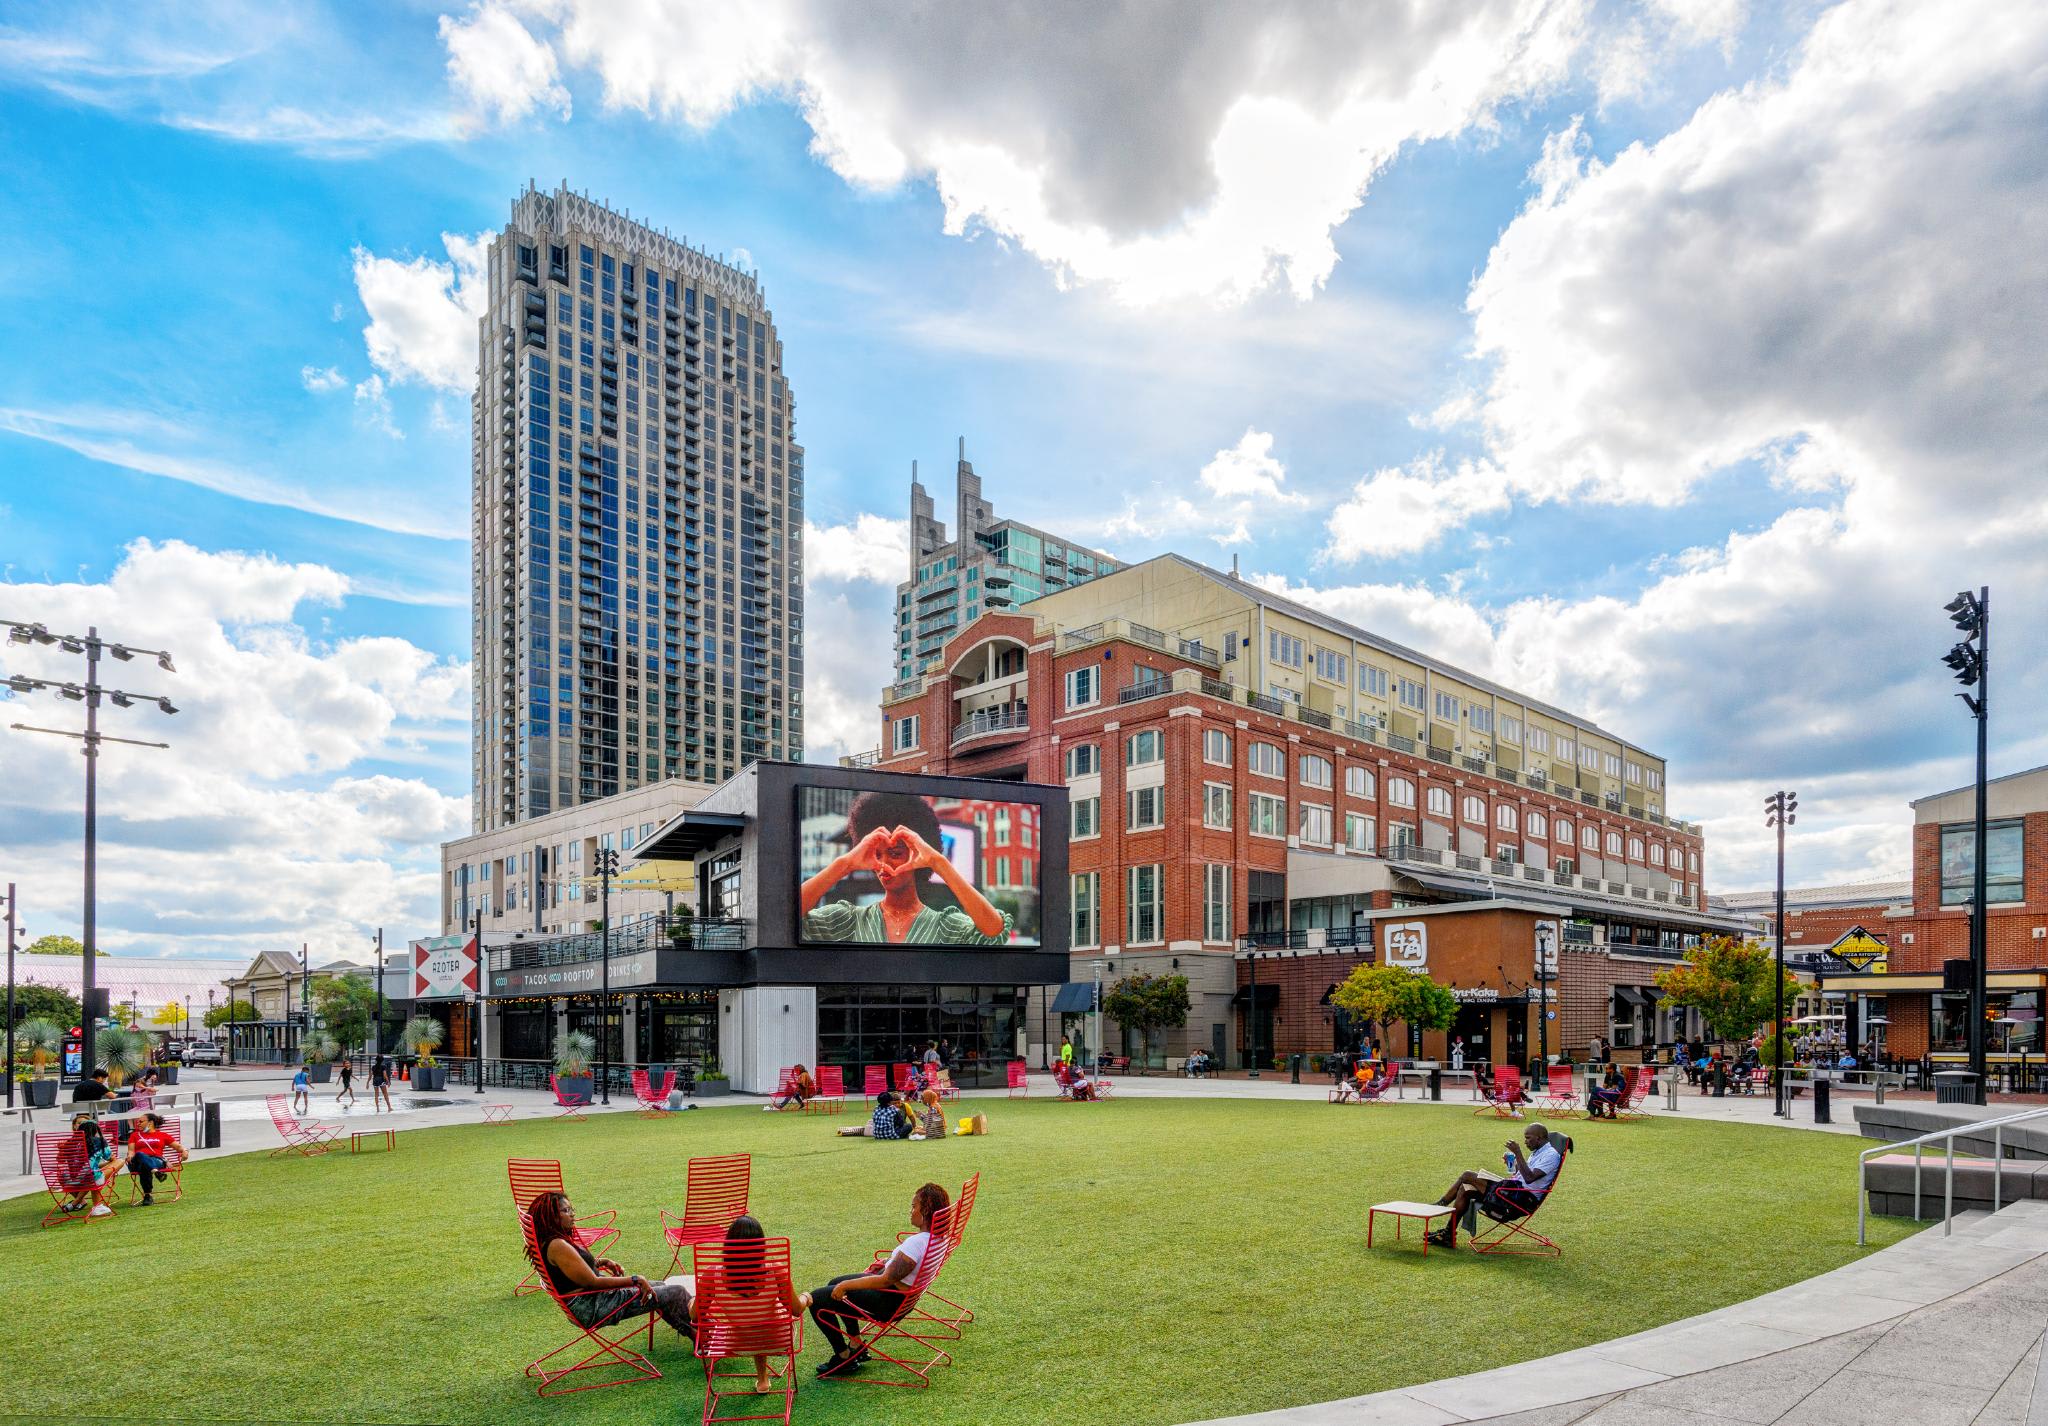 Relax in the green space after shopping at Atlantic Station